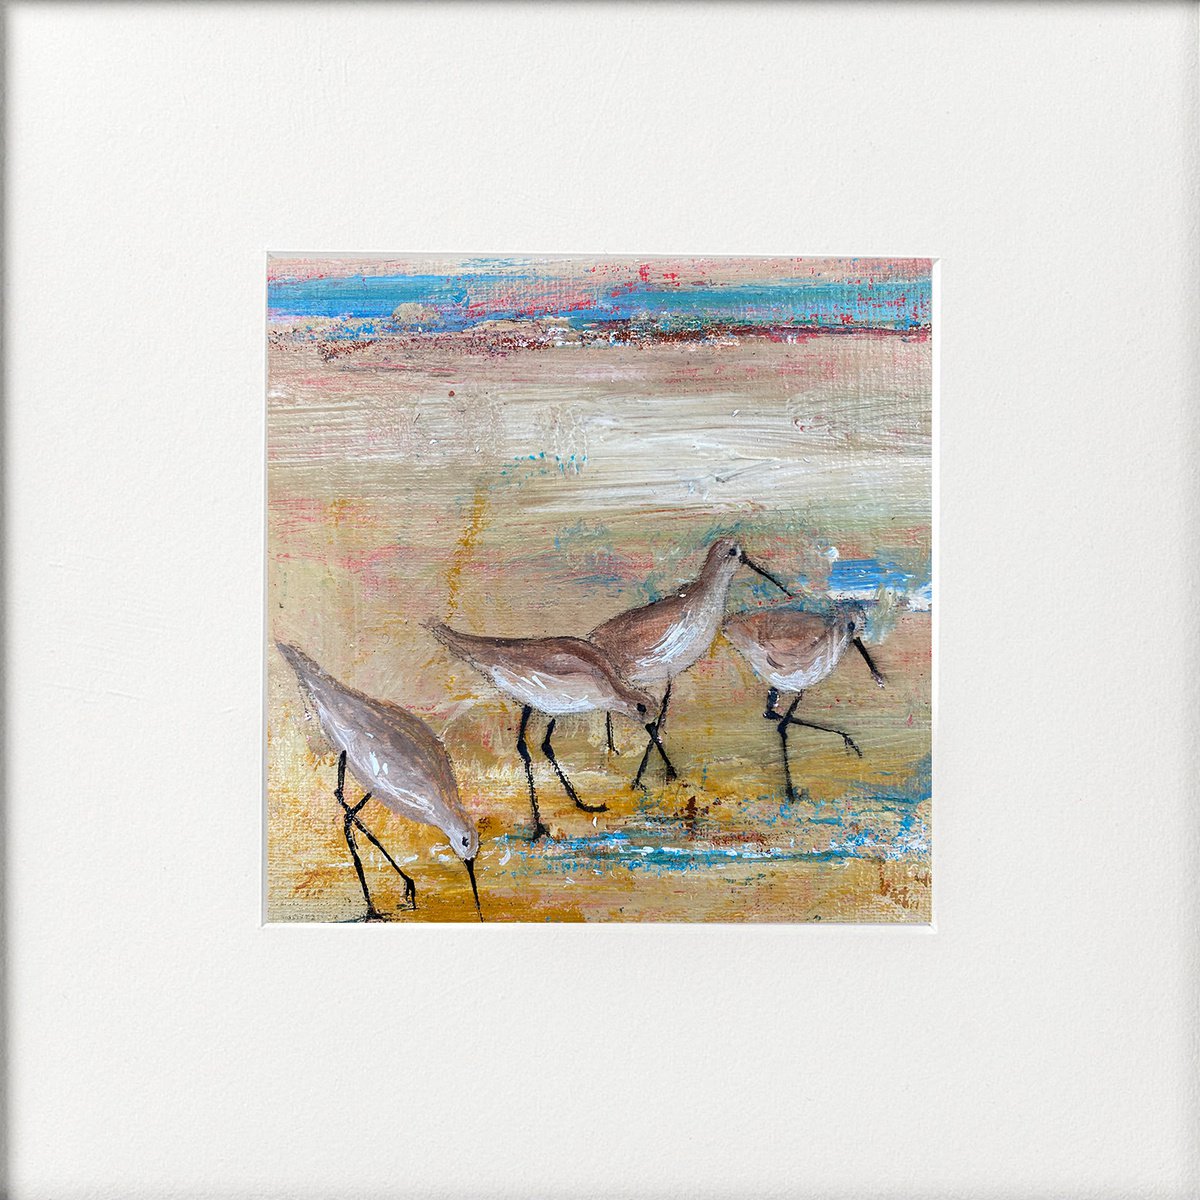 Wading Birds on the beach by Teresa Tanner